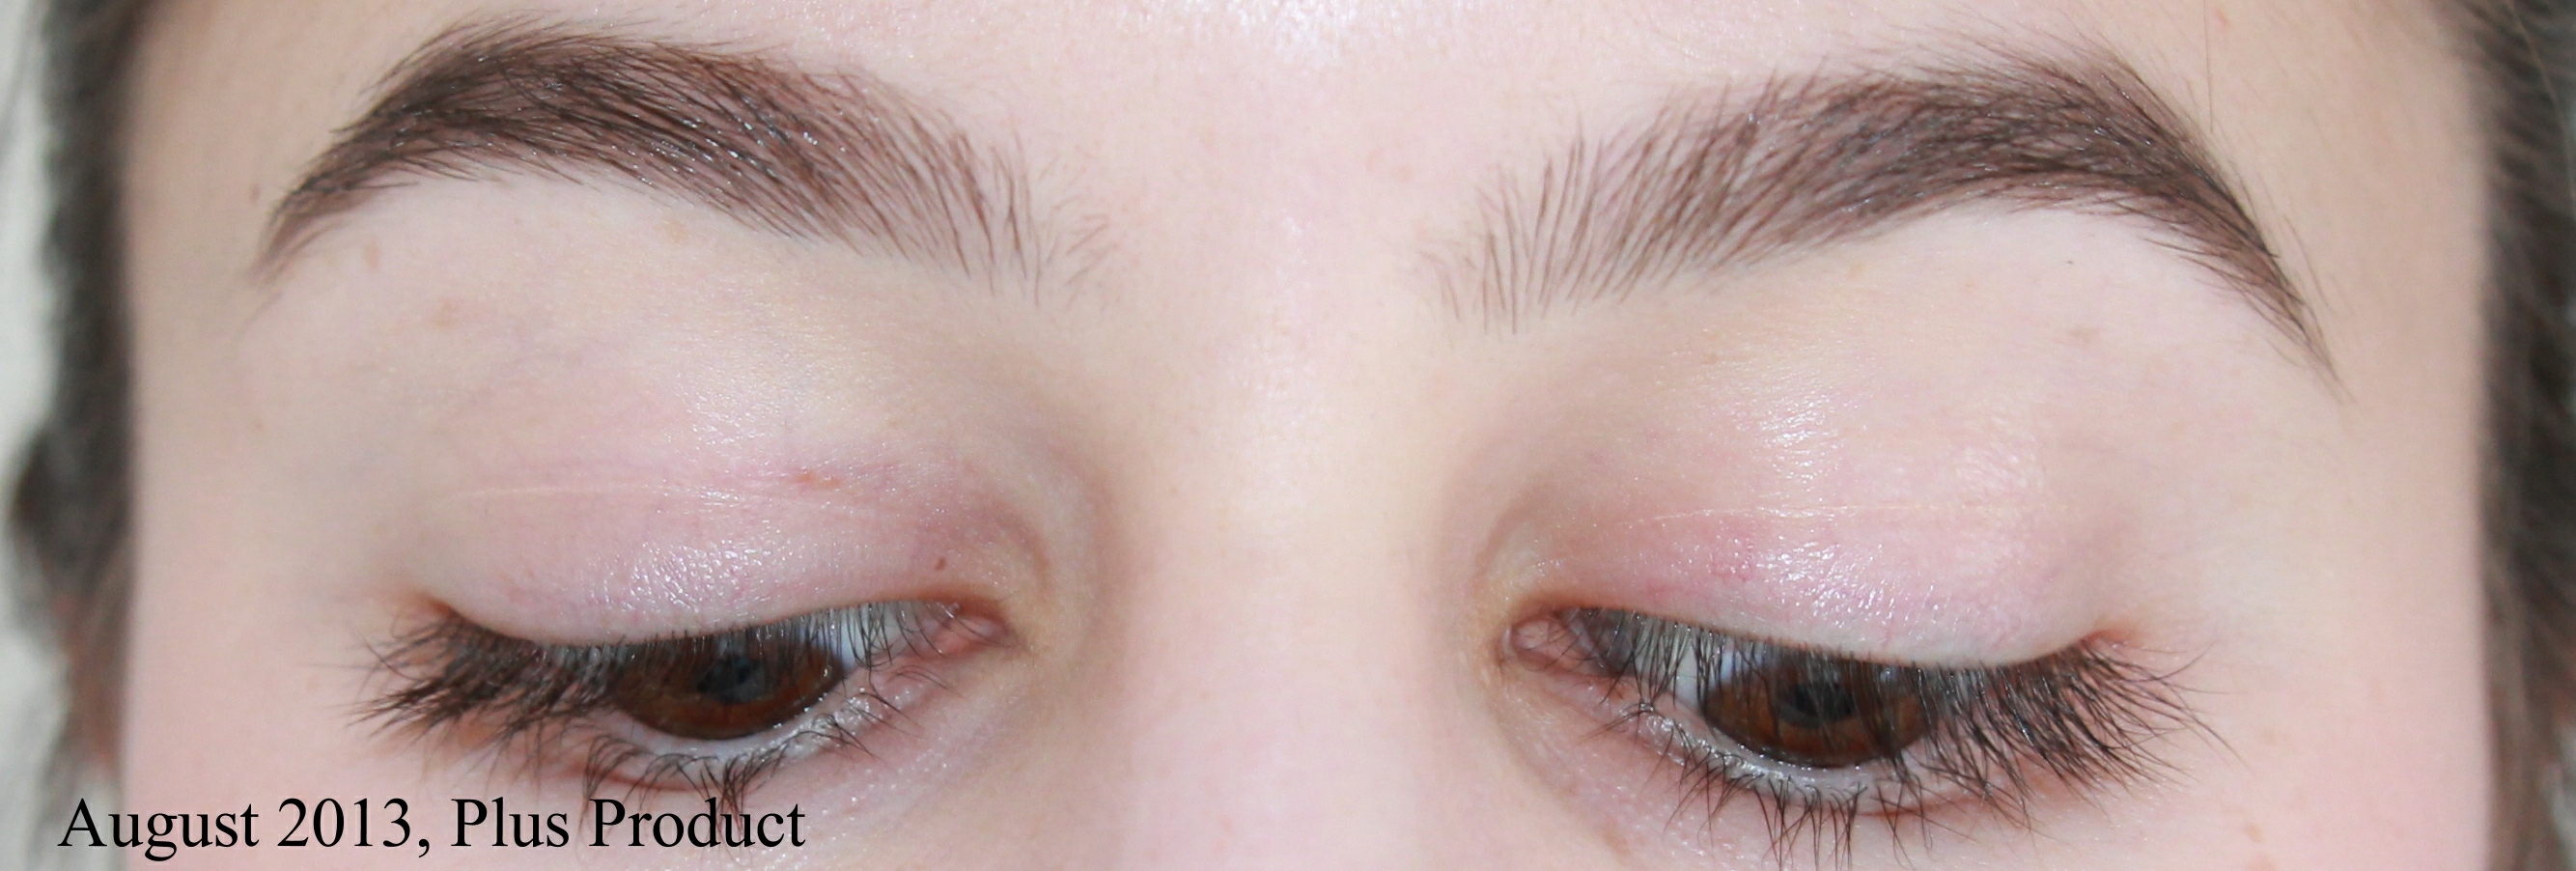 Growing out the Brows: Picture Timeline and Tips Blog - Shameless ...